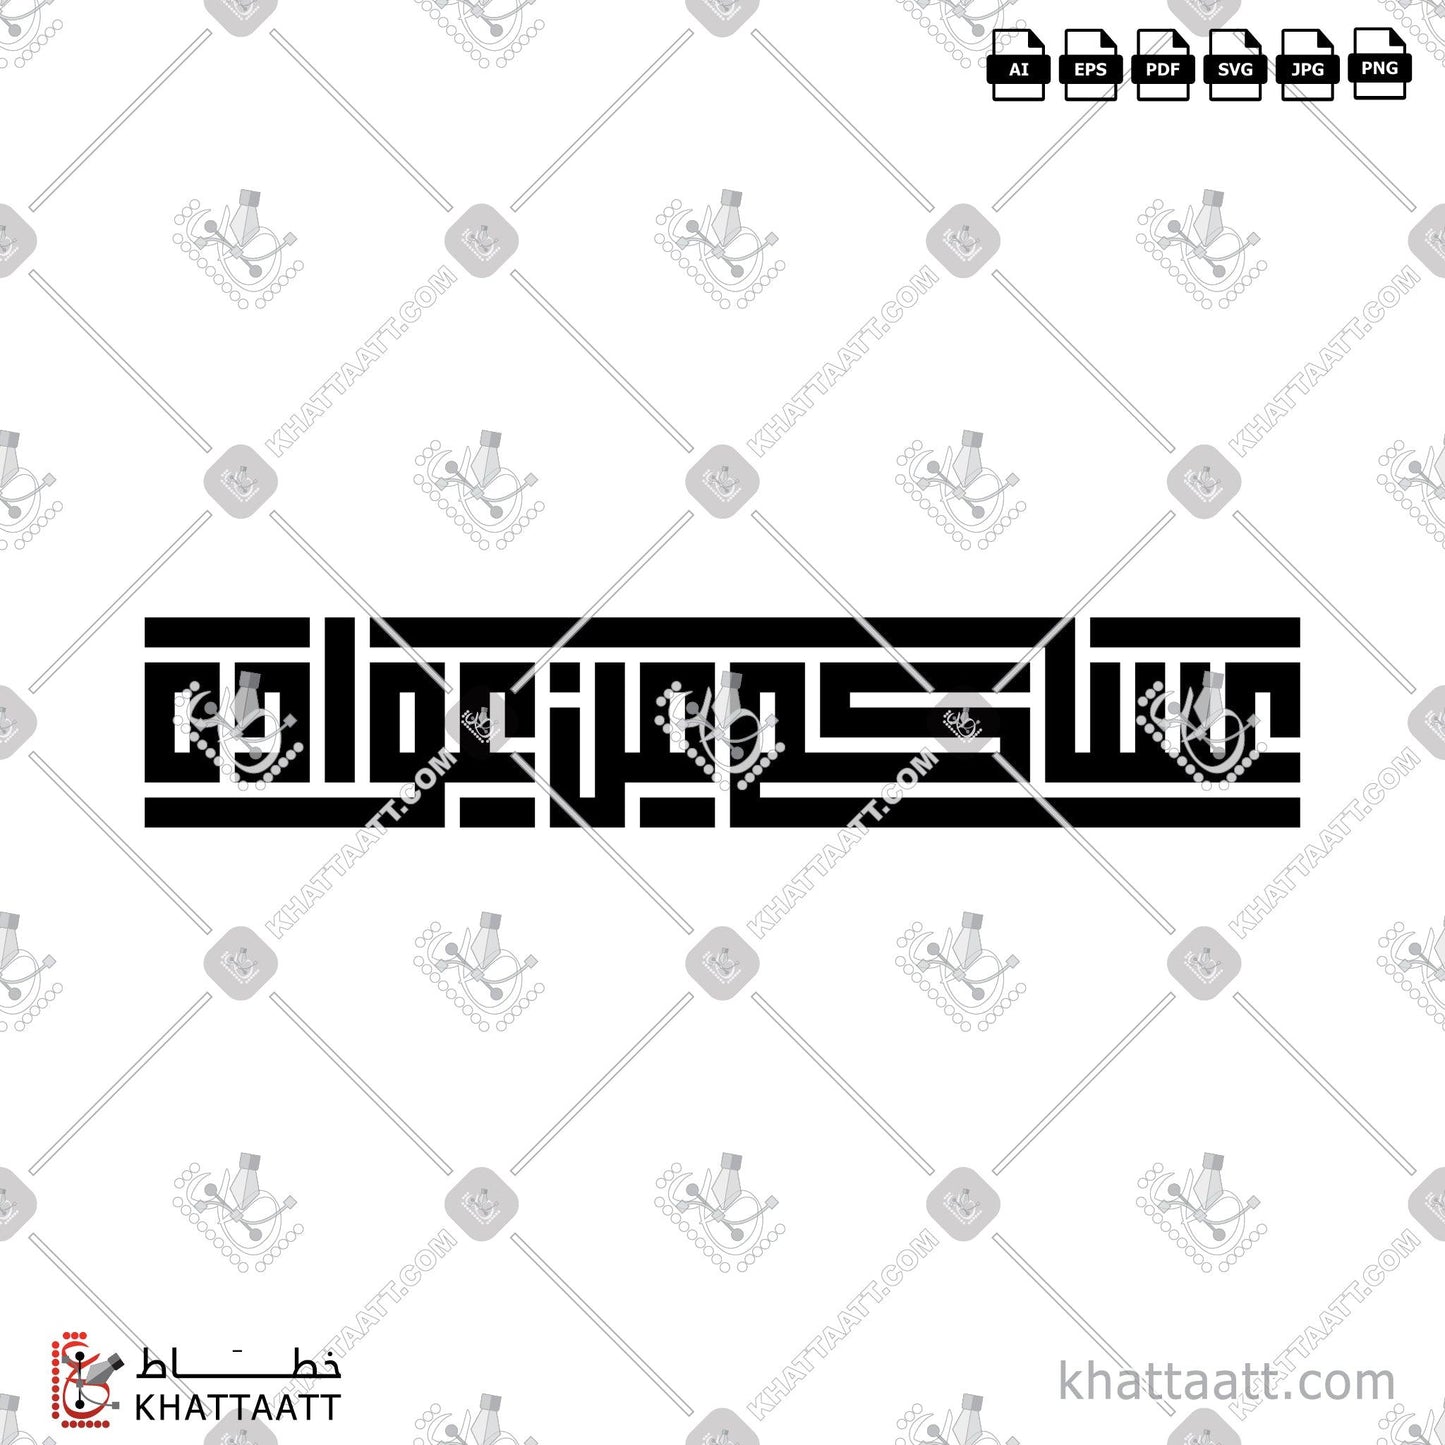 Download Arabic Calligraphy of عساكم من عواده in Kufi - الخط الكوفي in vector and .png